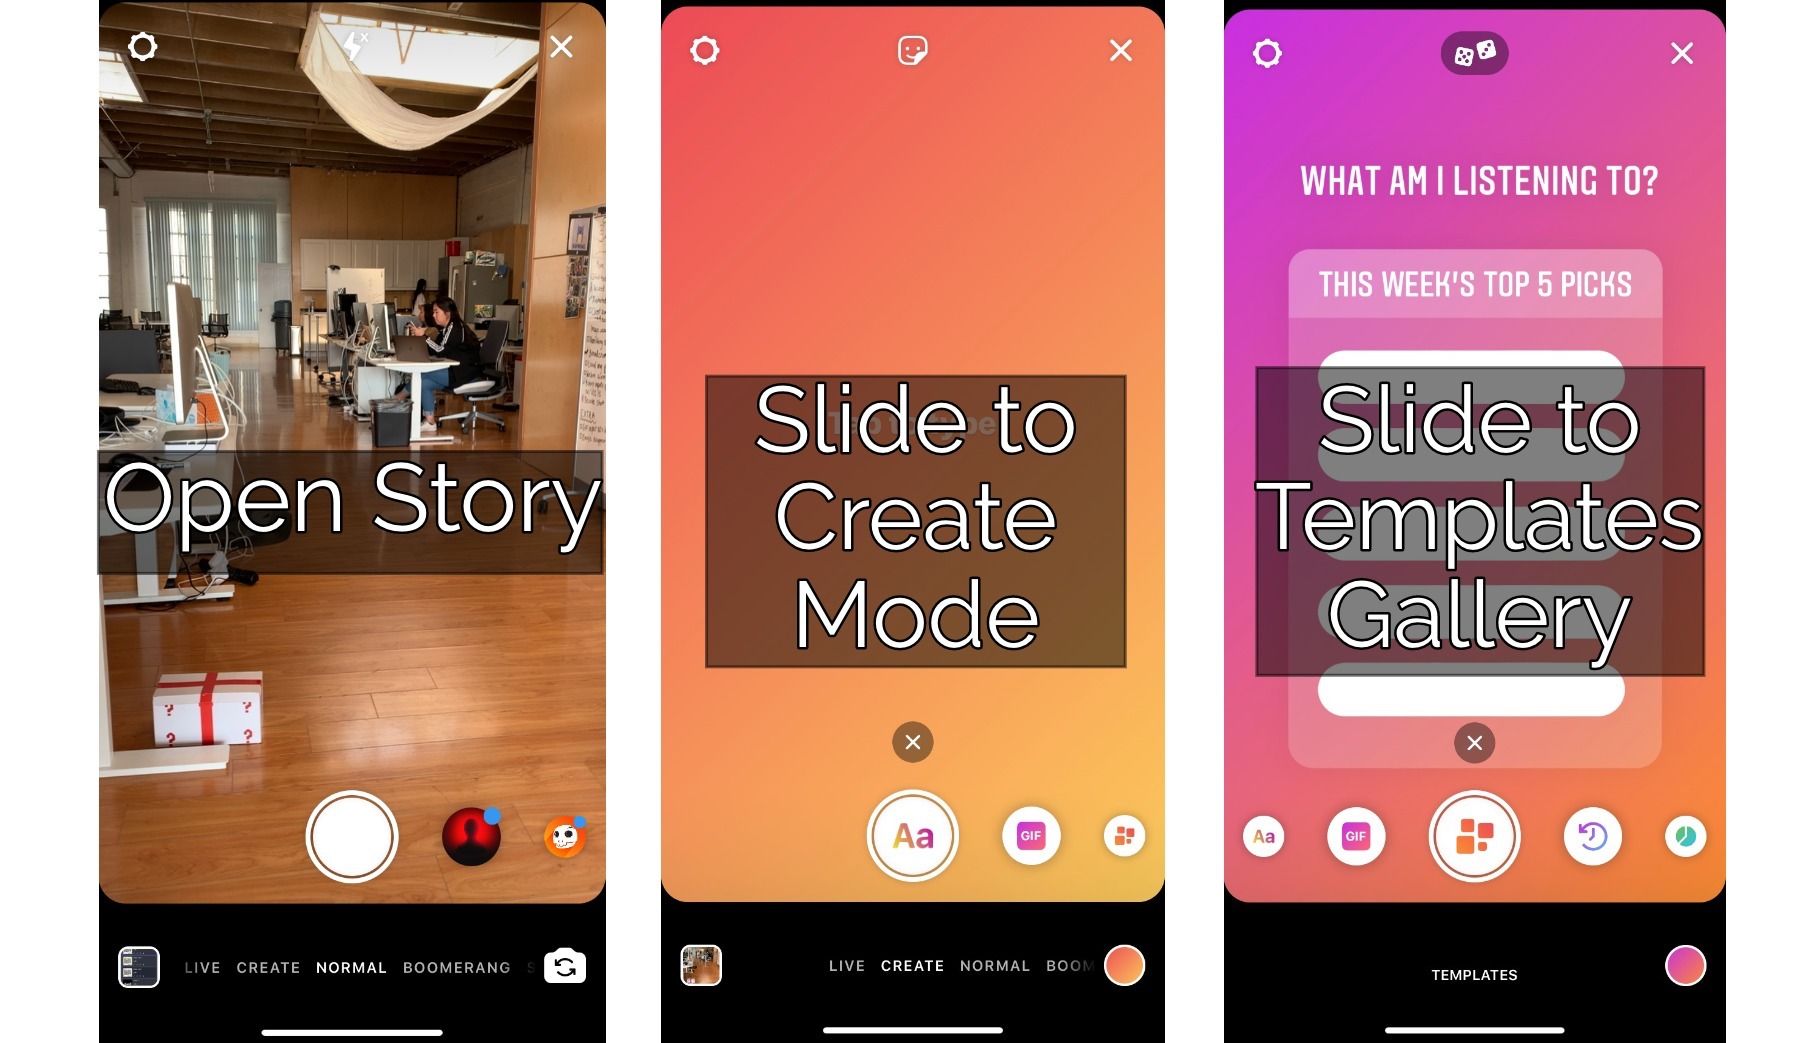 How to Make Custom Instagram Story Challenge Templates